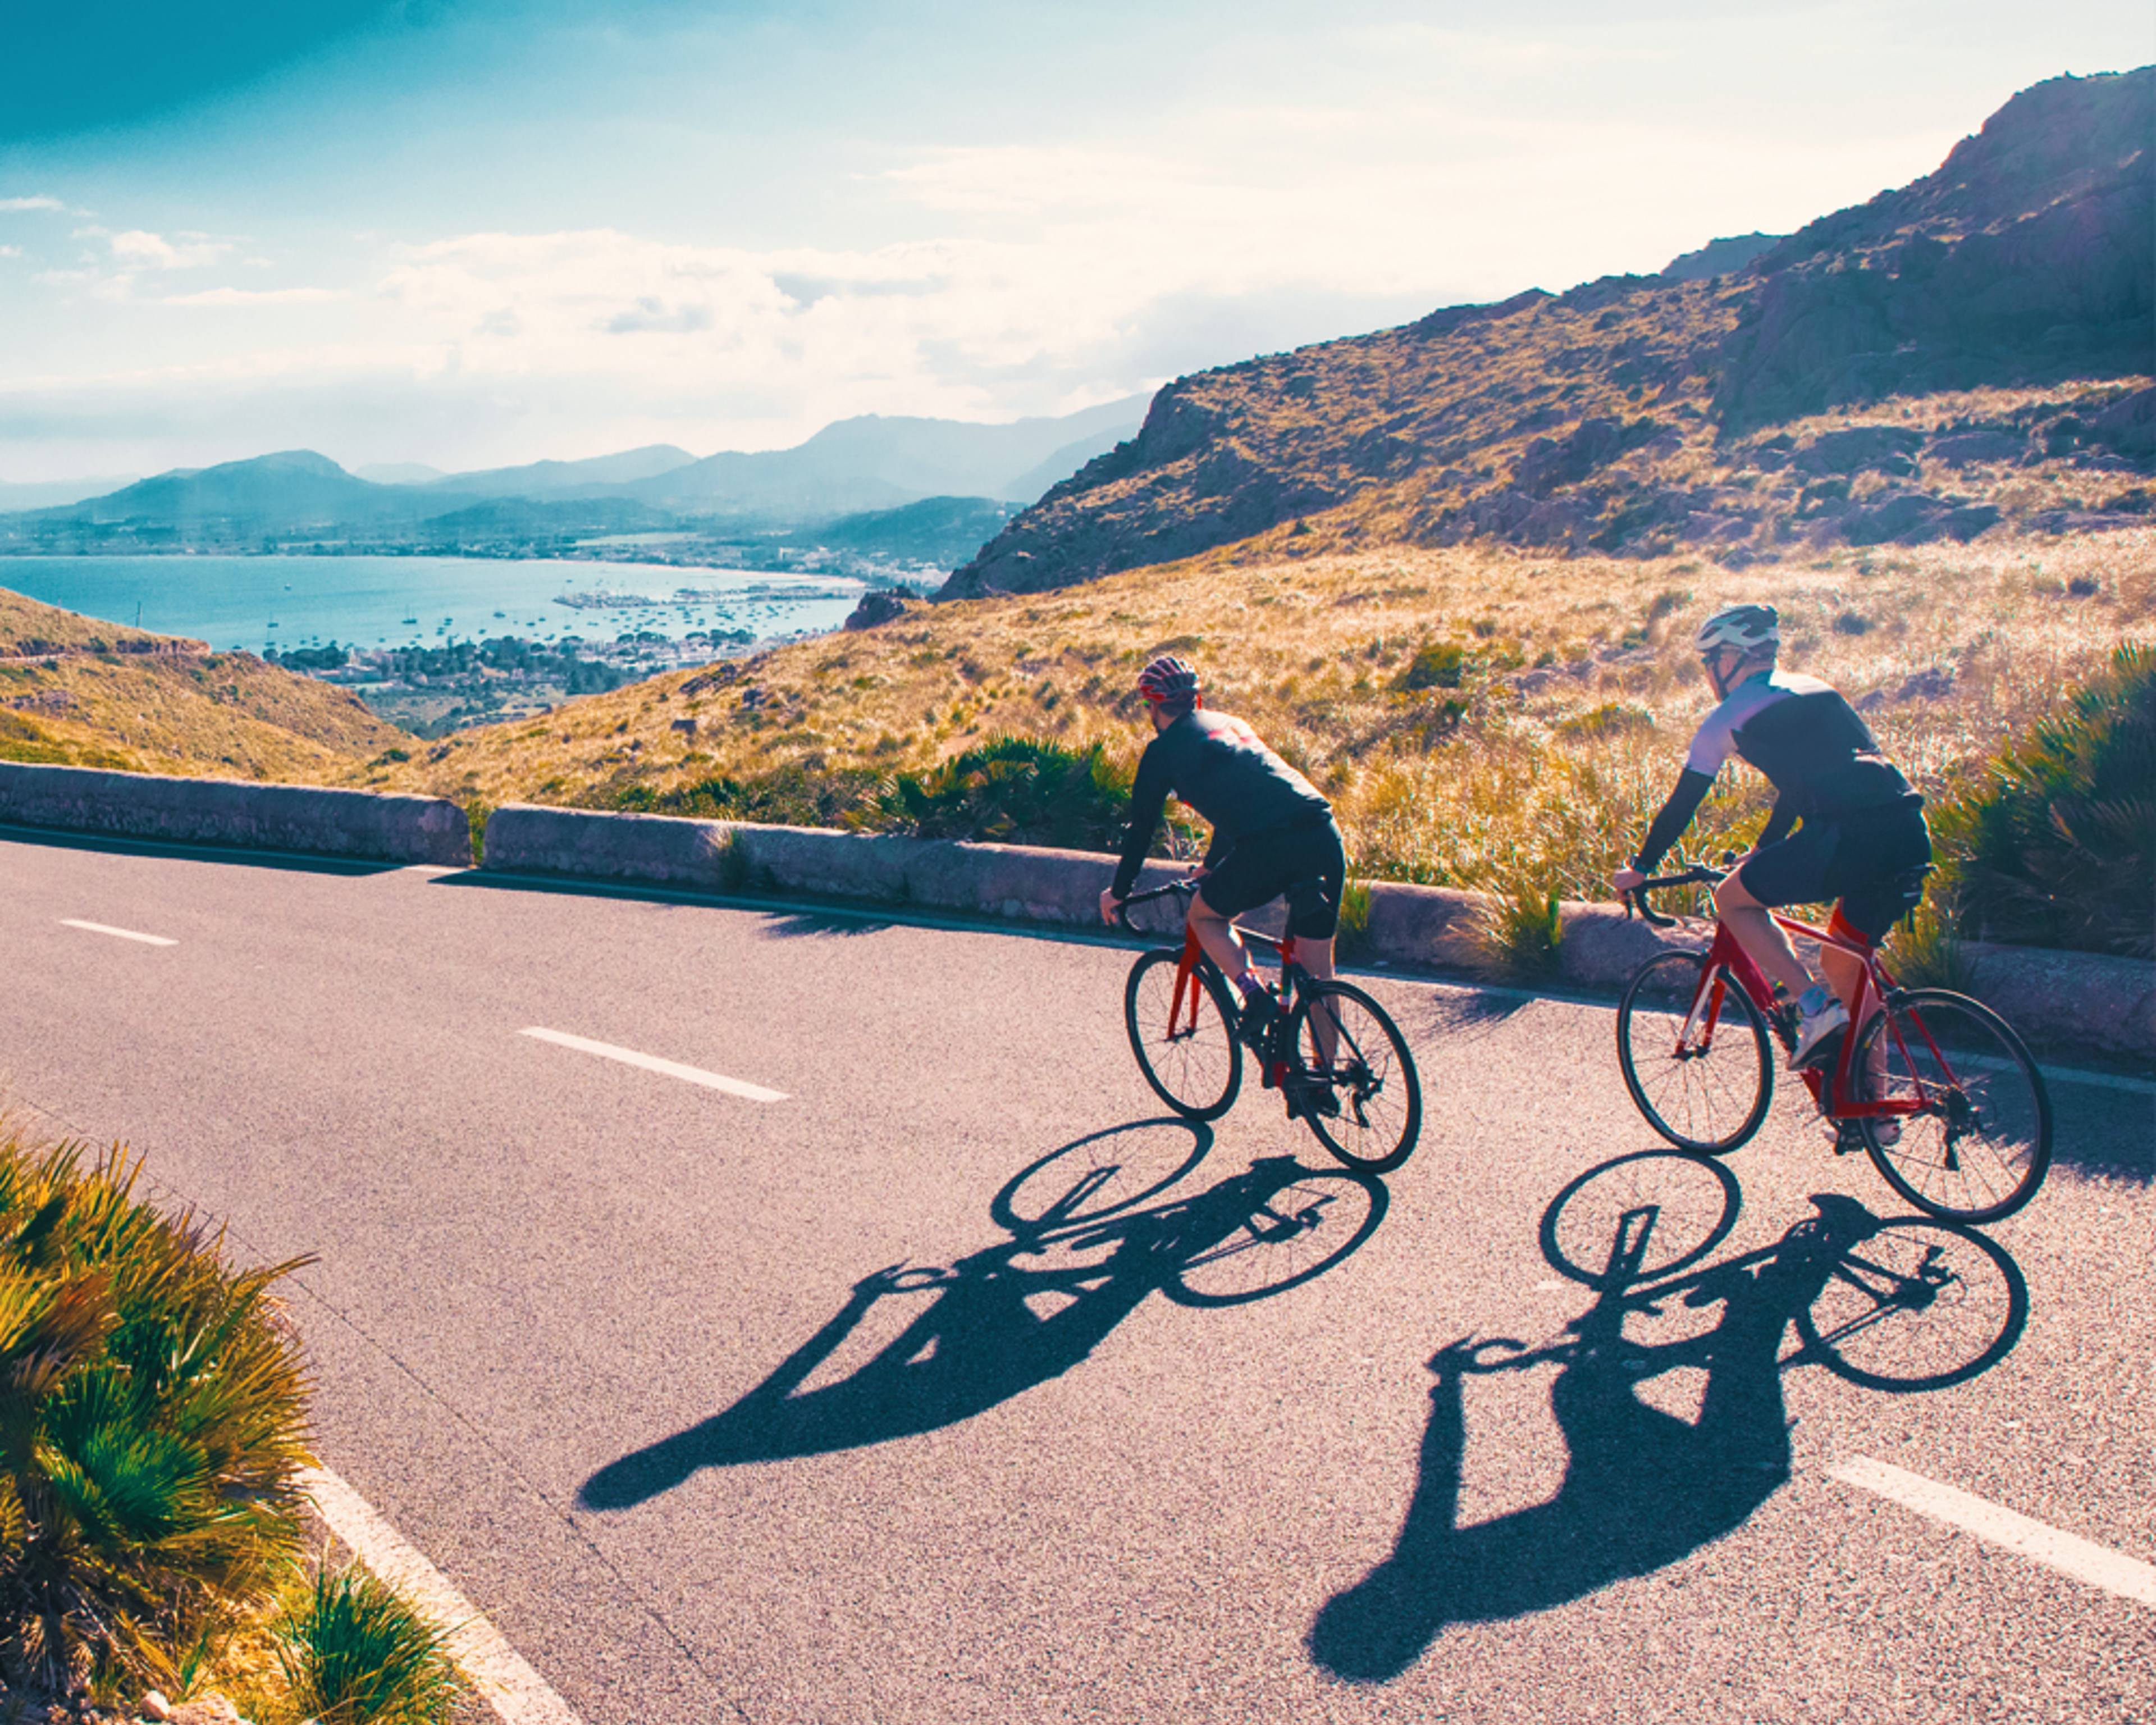 Design your perfect cycling trip with a local expert in Spain